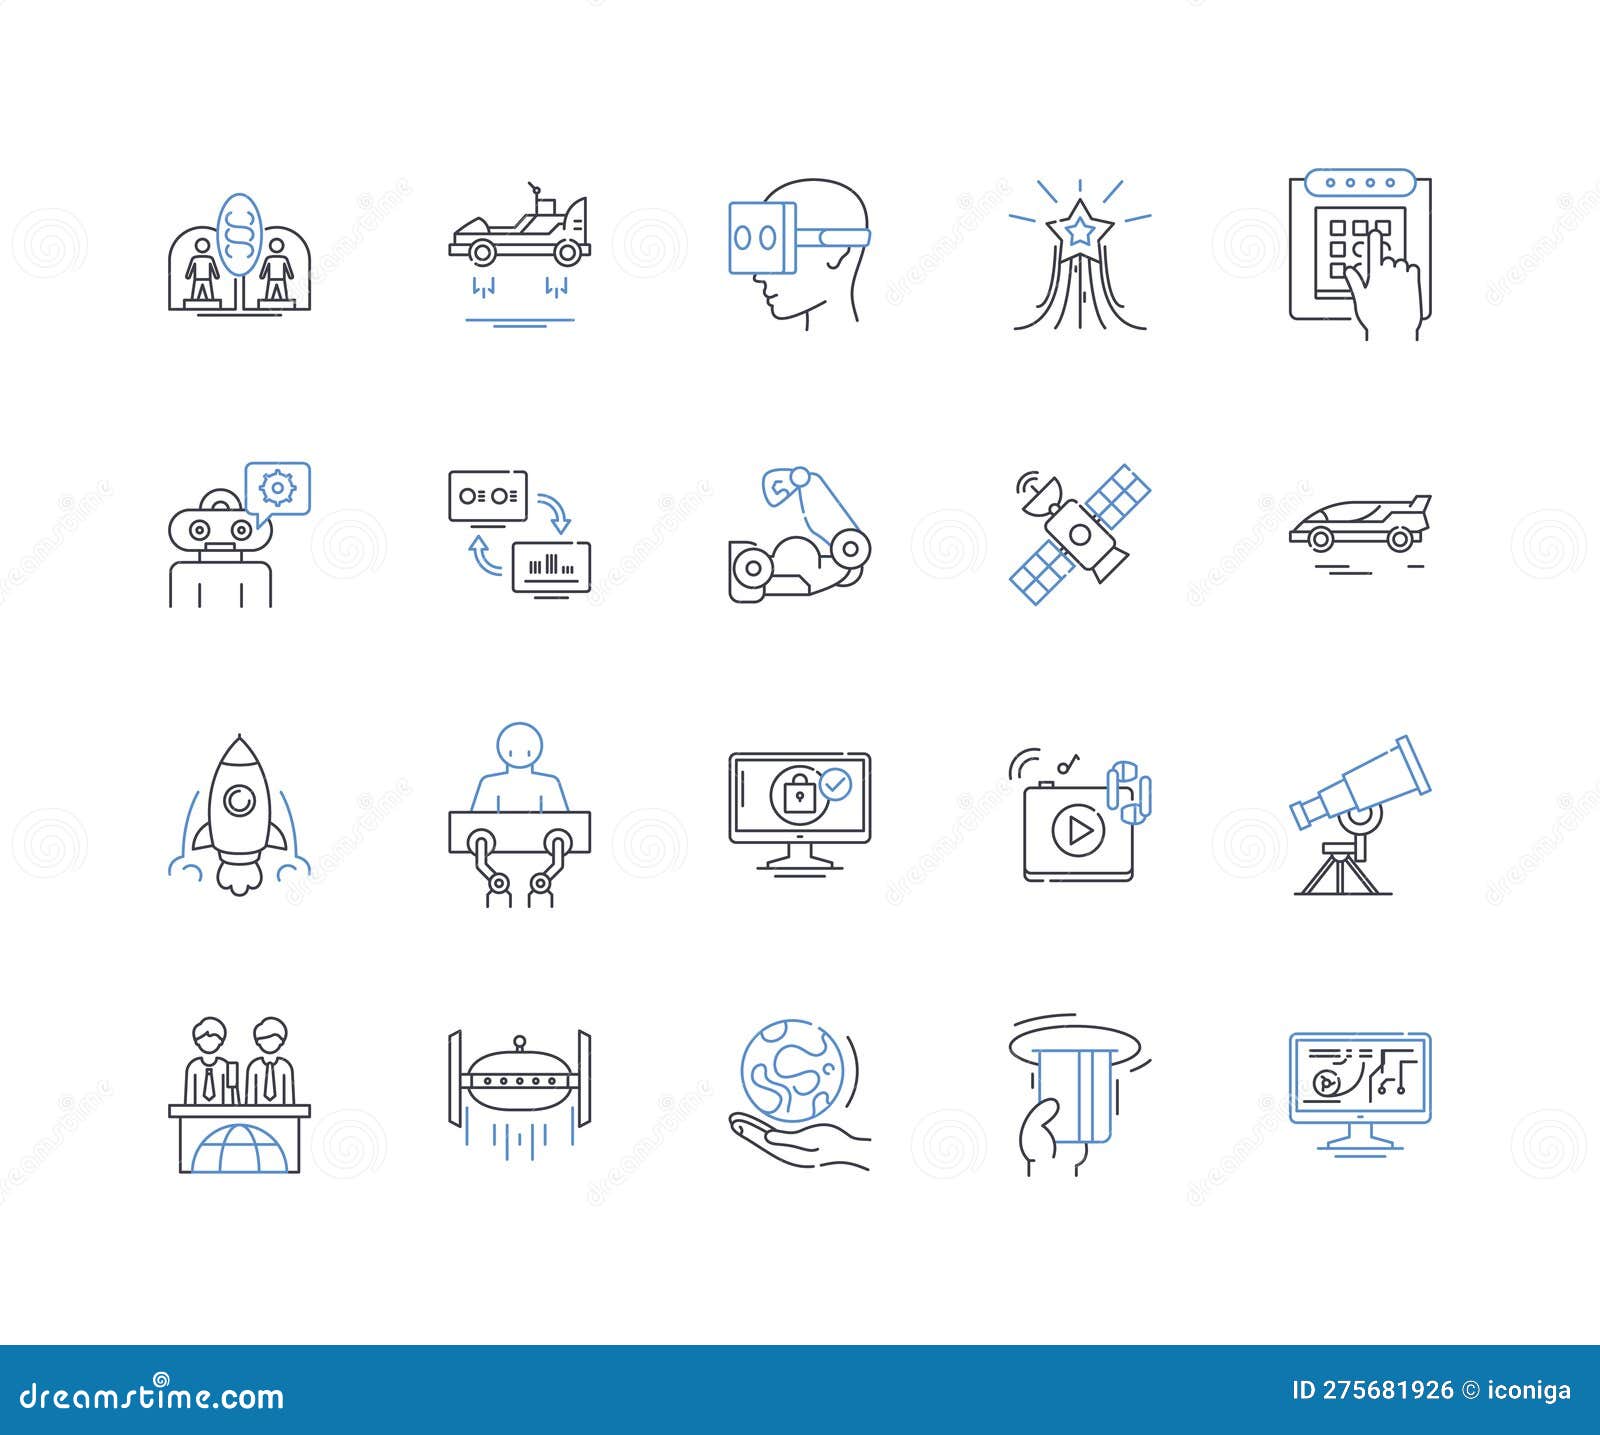 electronic security line icons collection. surveillance, access, firewall, encryption, biometric, authentication